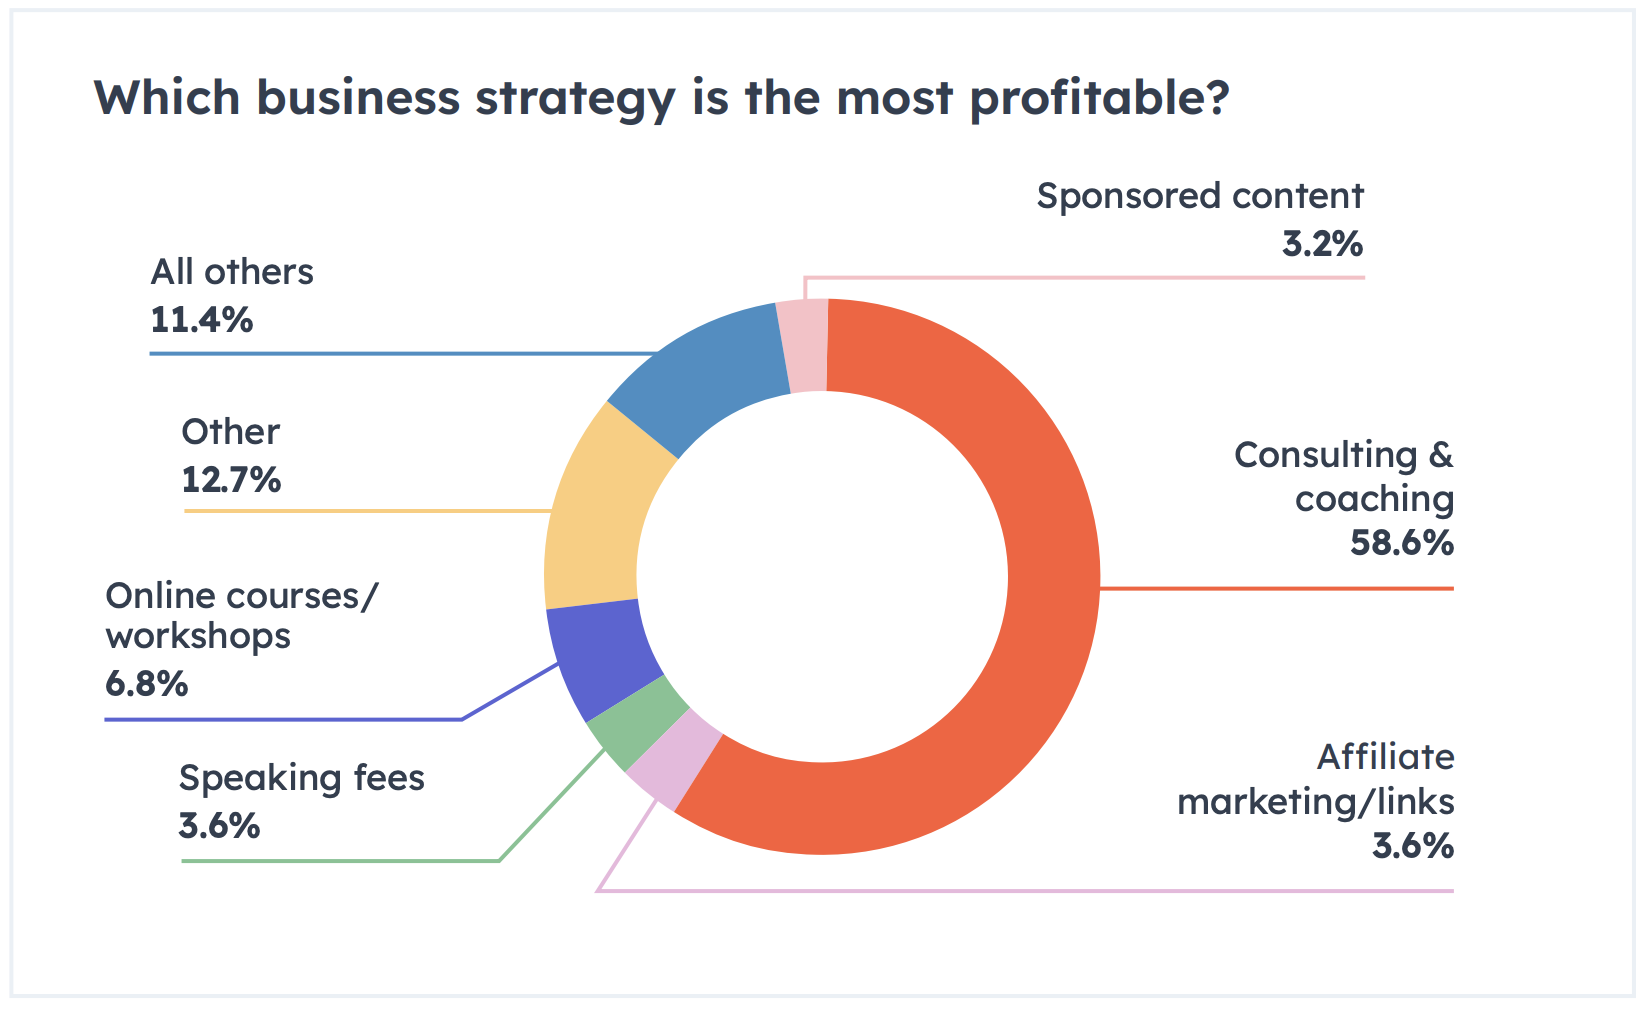 which business strategy is most profitable for content creators